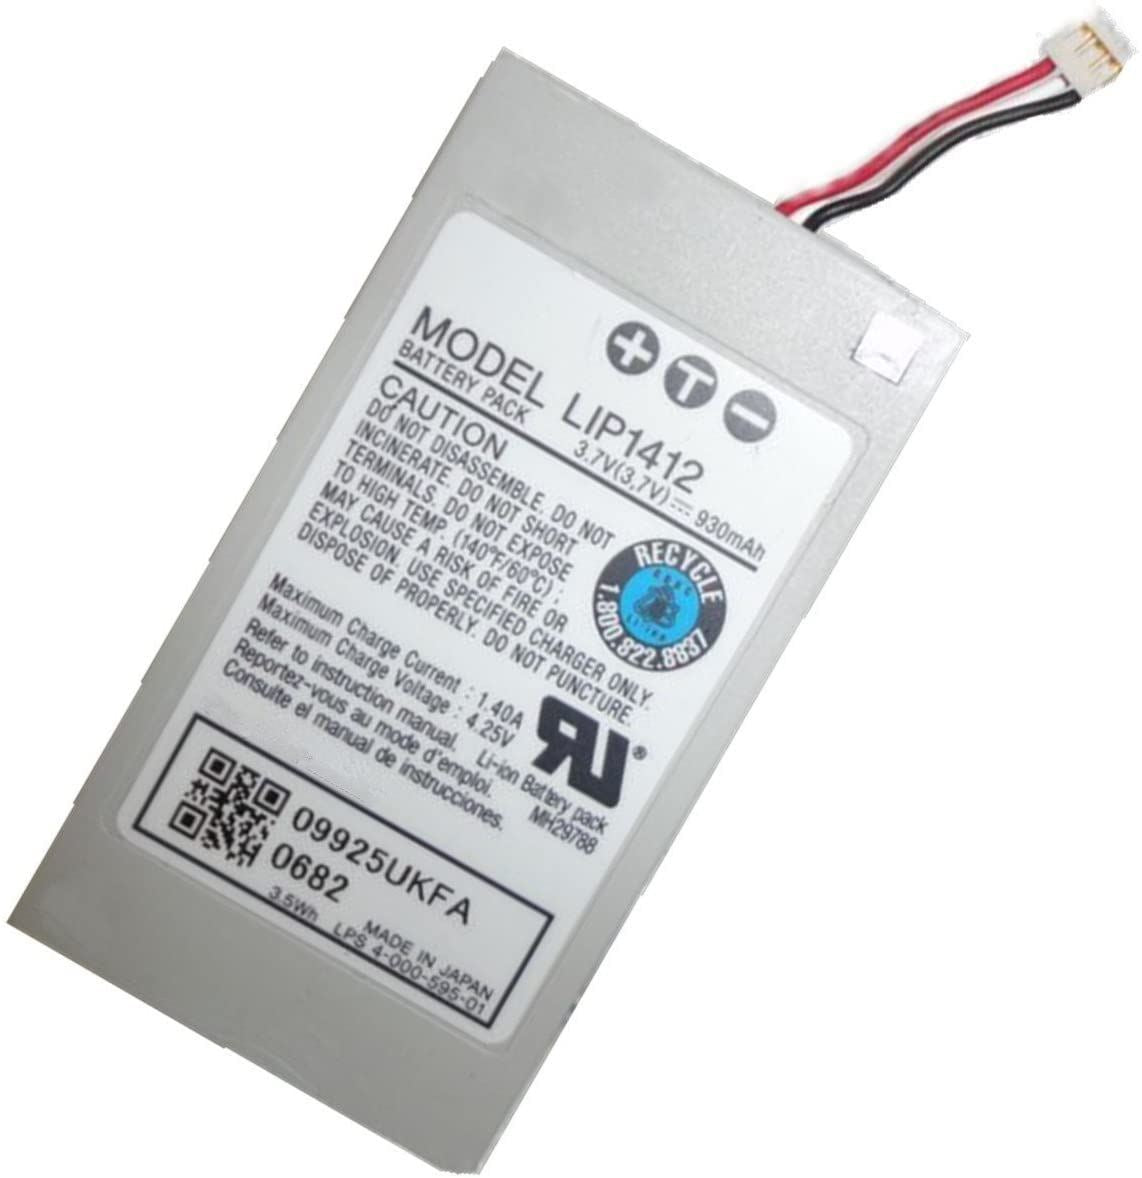 for Sony PSP GO - Replacement LIP1412 930mAh 3.7v Battery | FPC